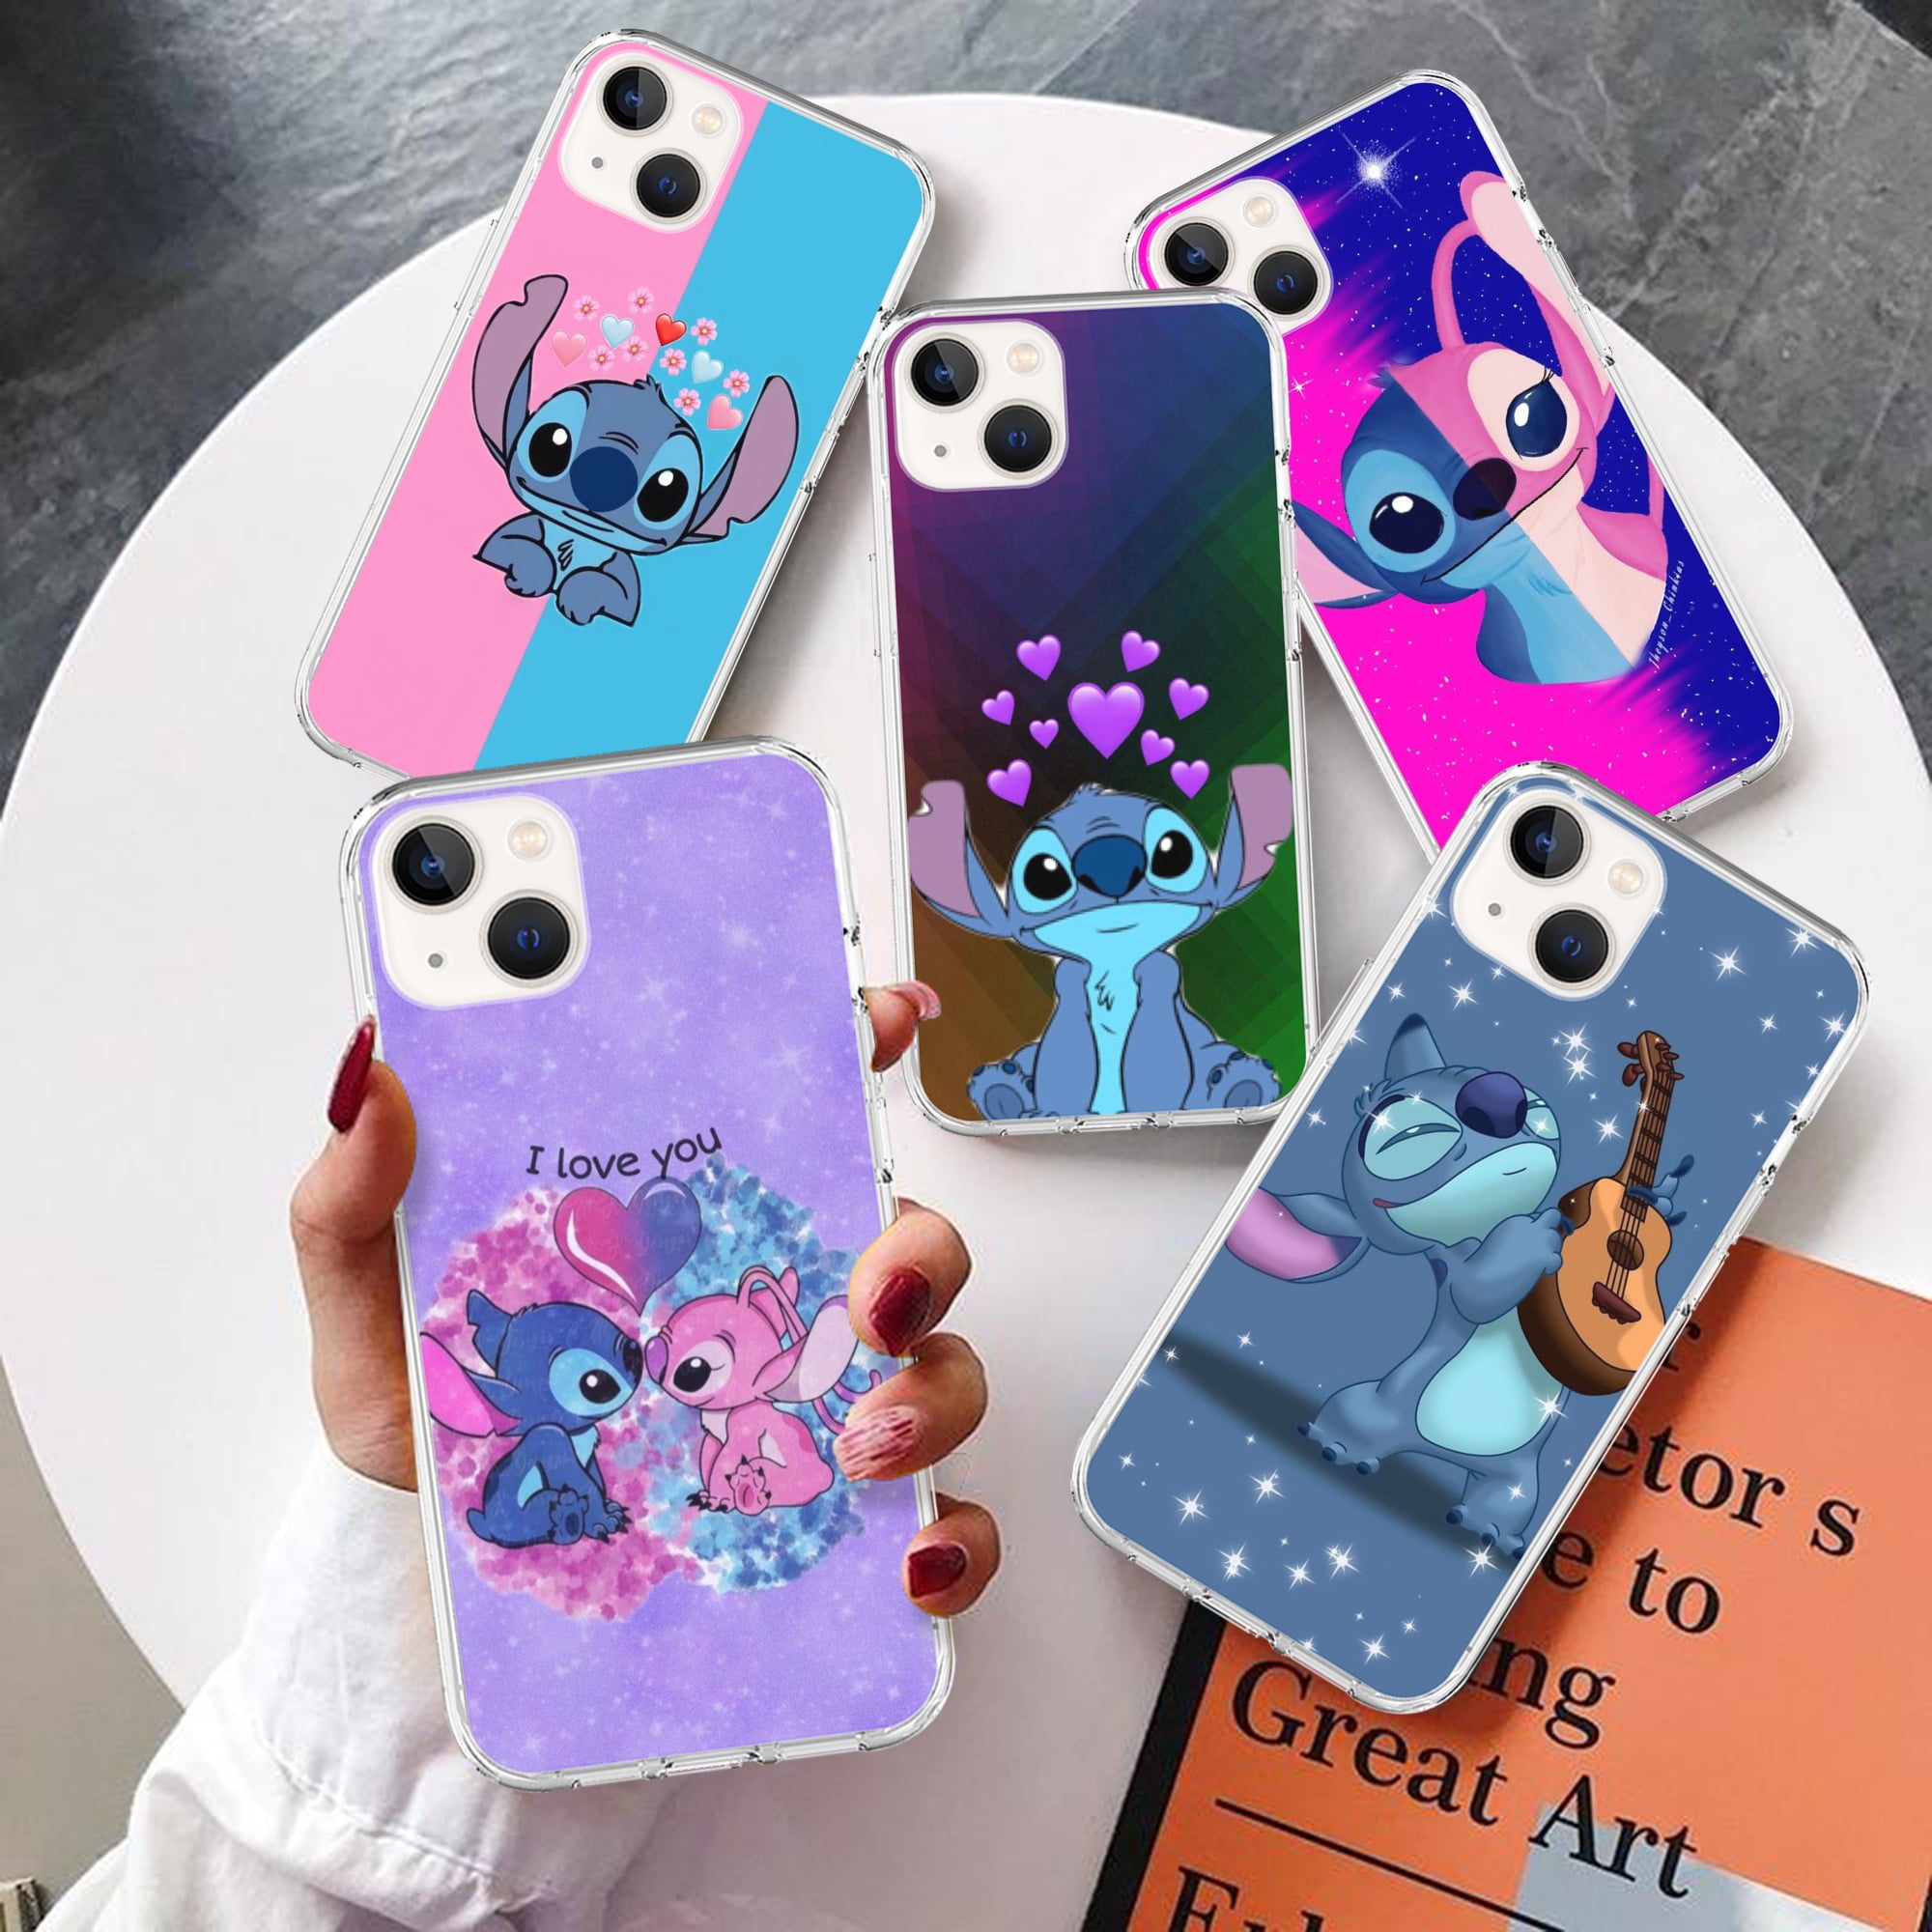 Stylo Stitch Disney - Mobile Phone Cases & Covers - AliExpress